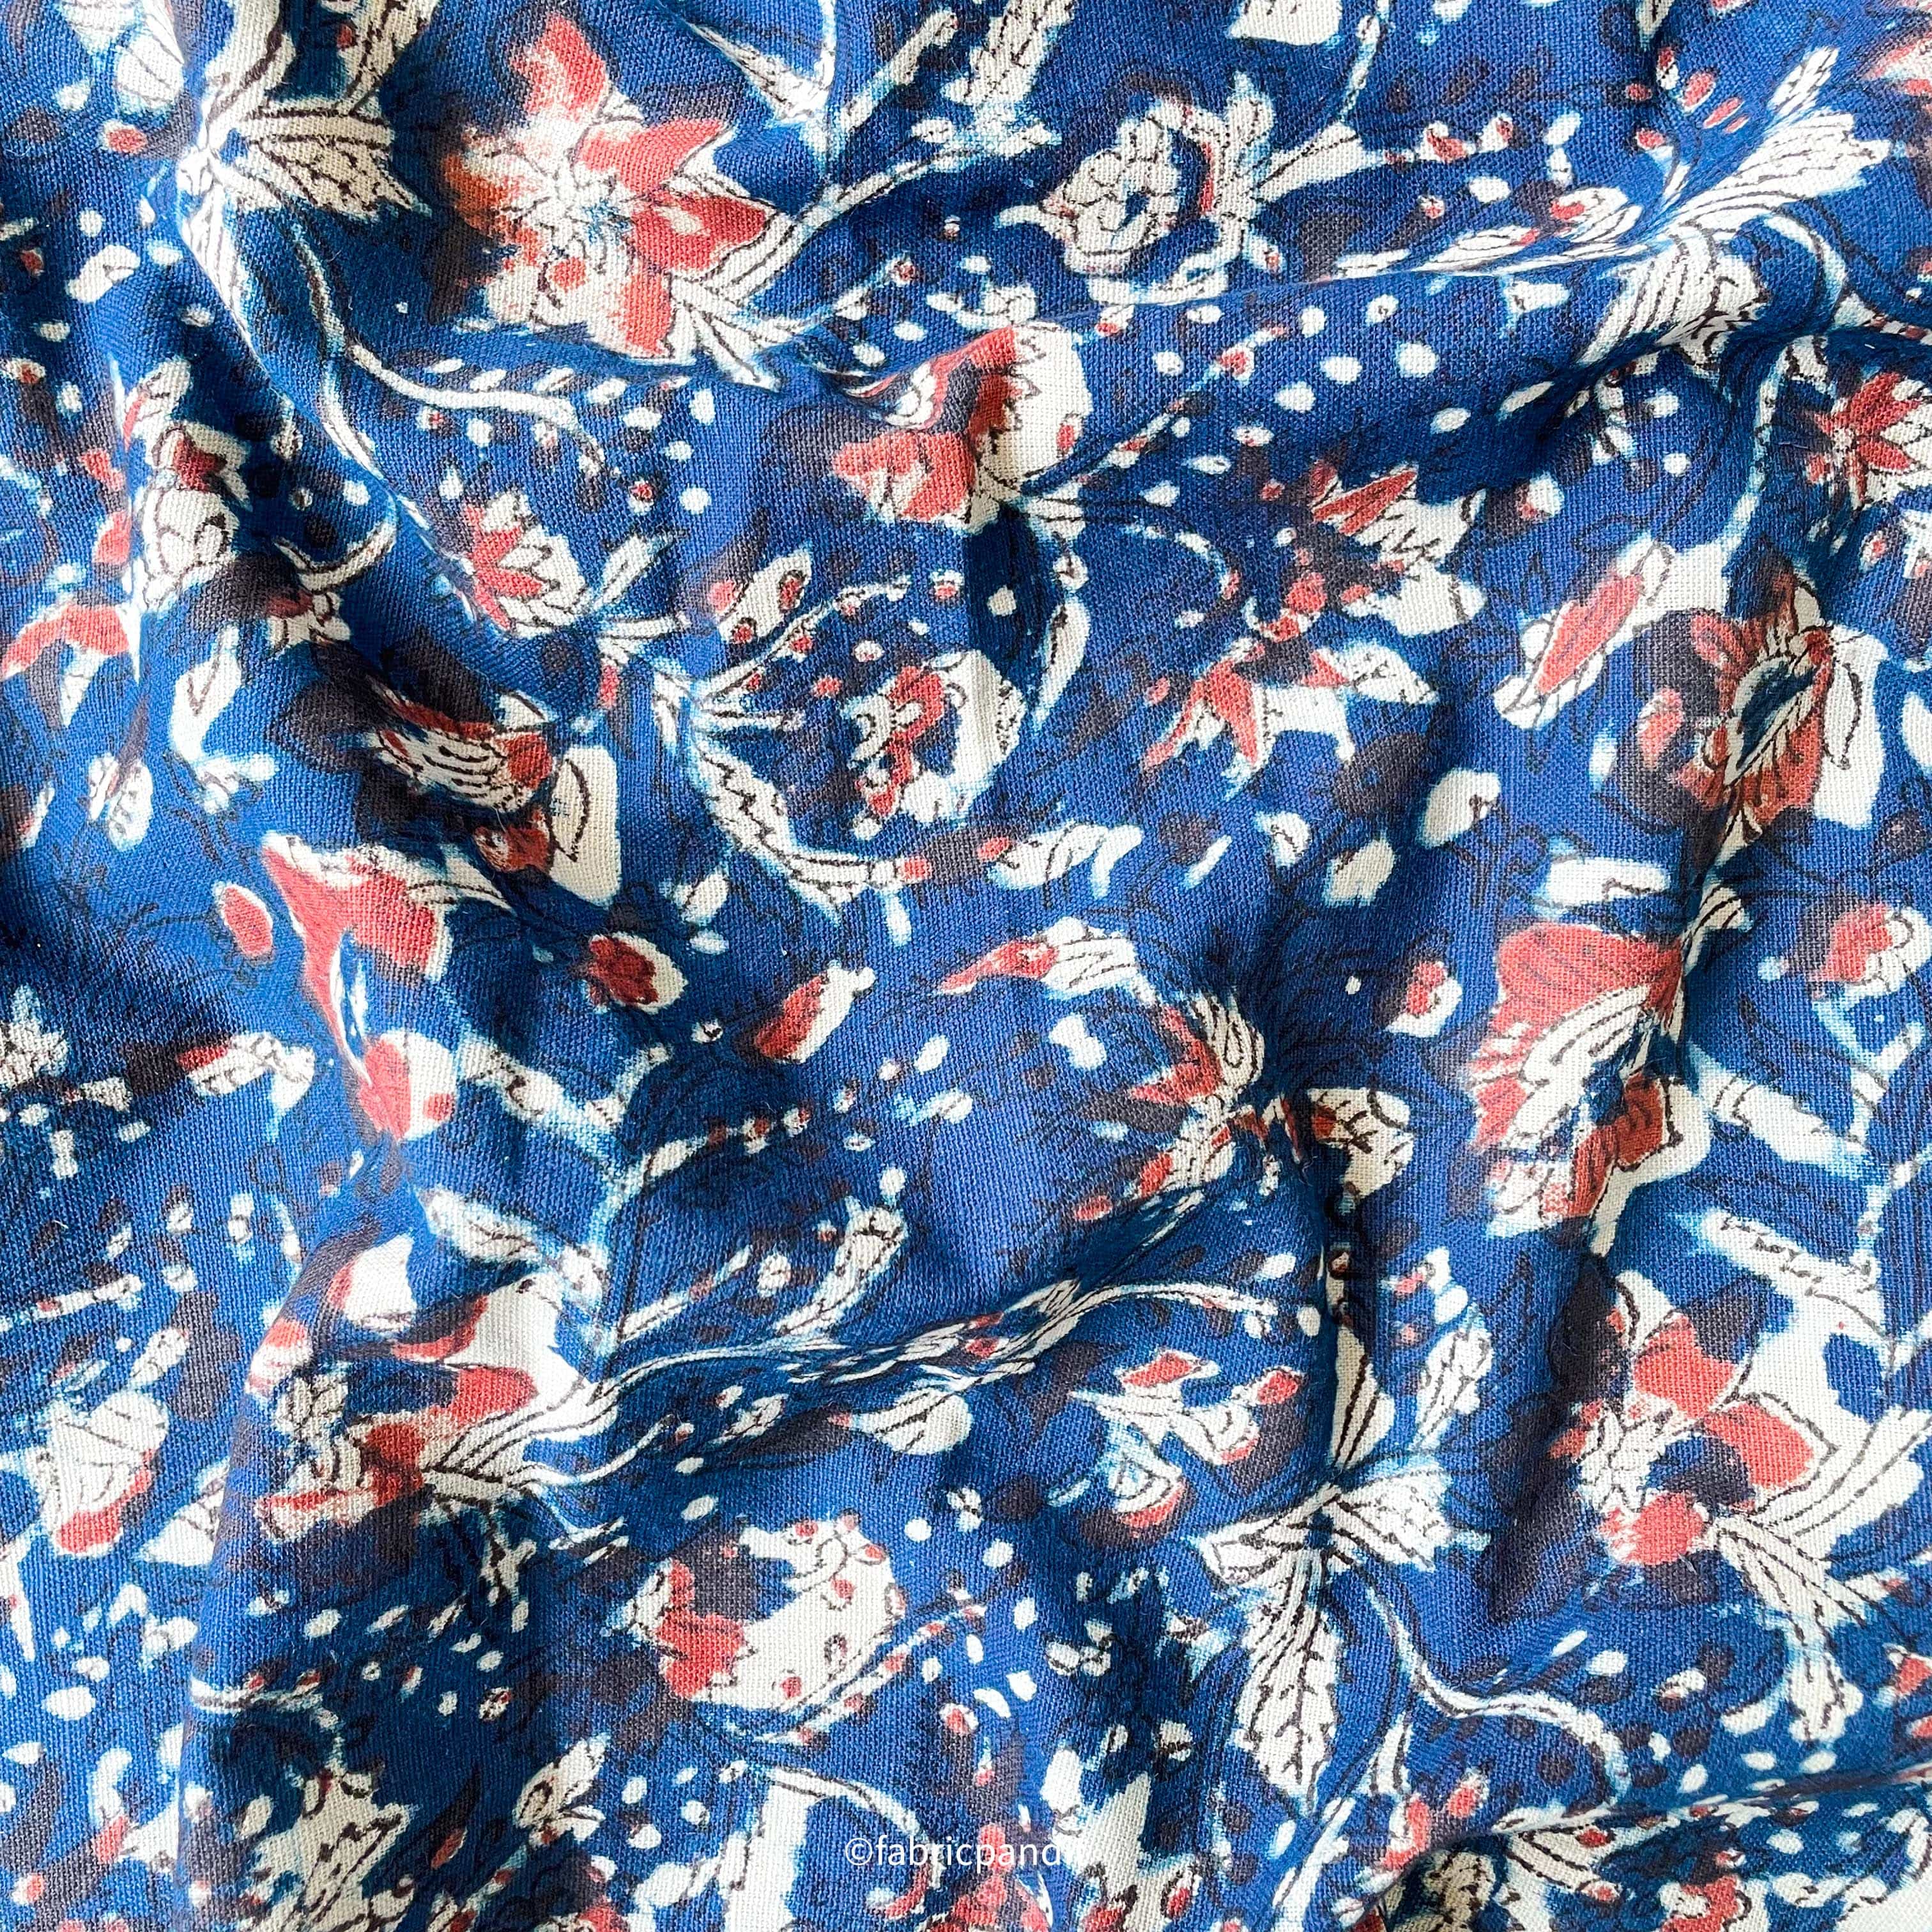 Red and Blue Floral Fabric: 100% Cotton